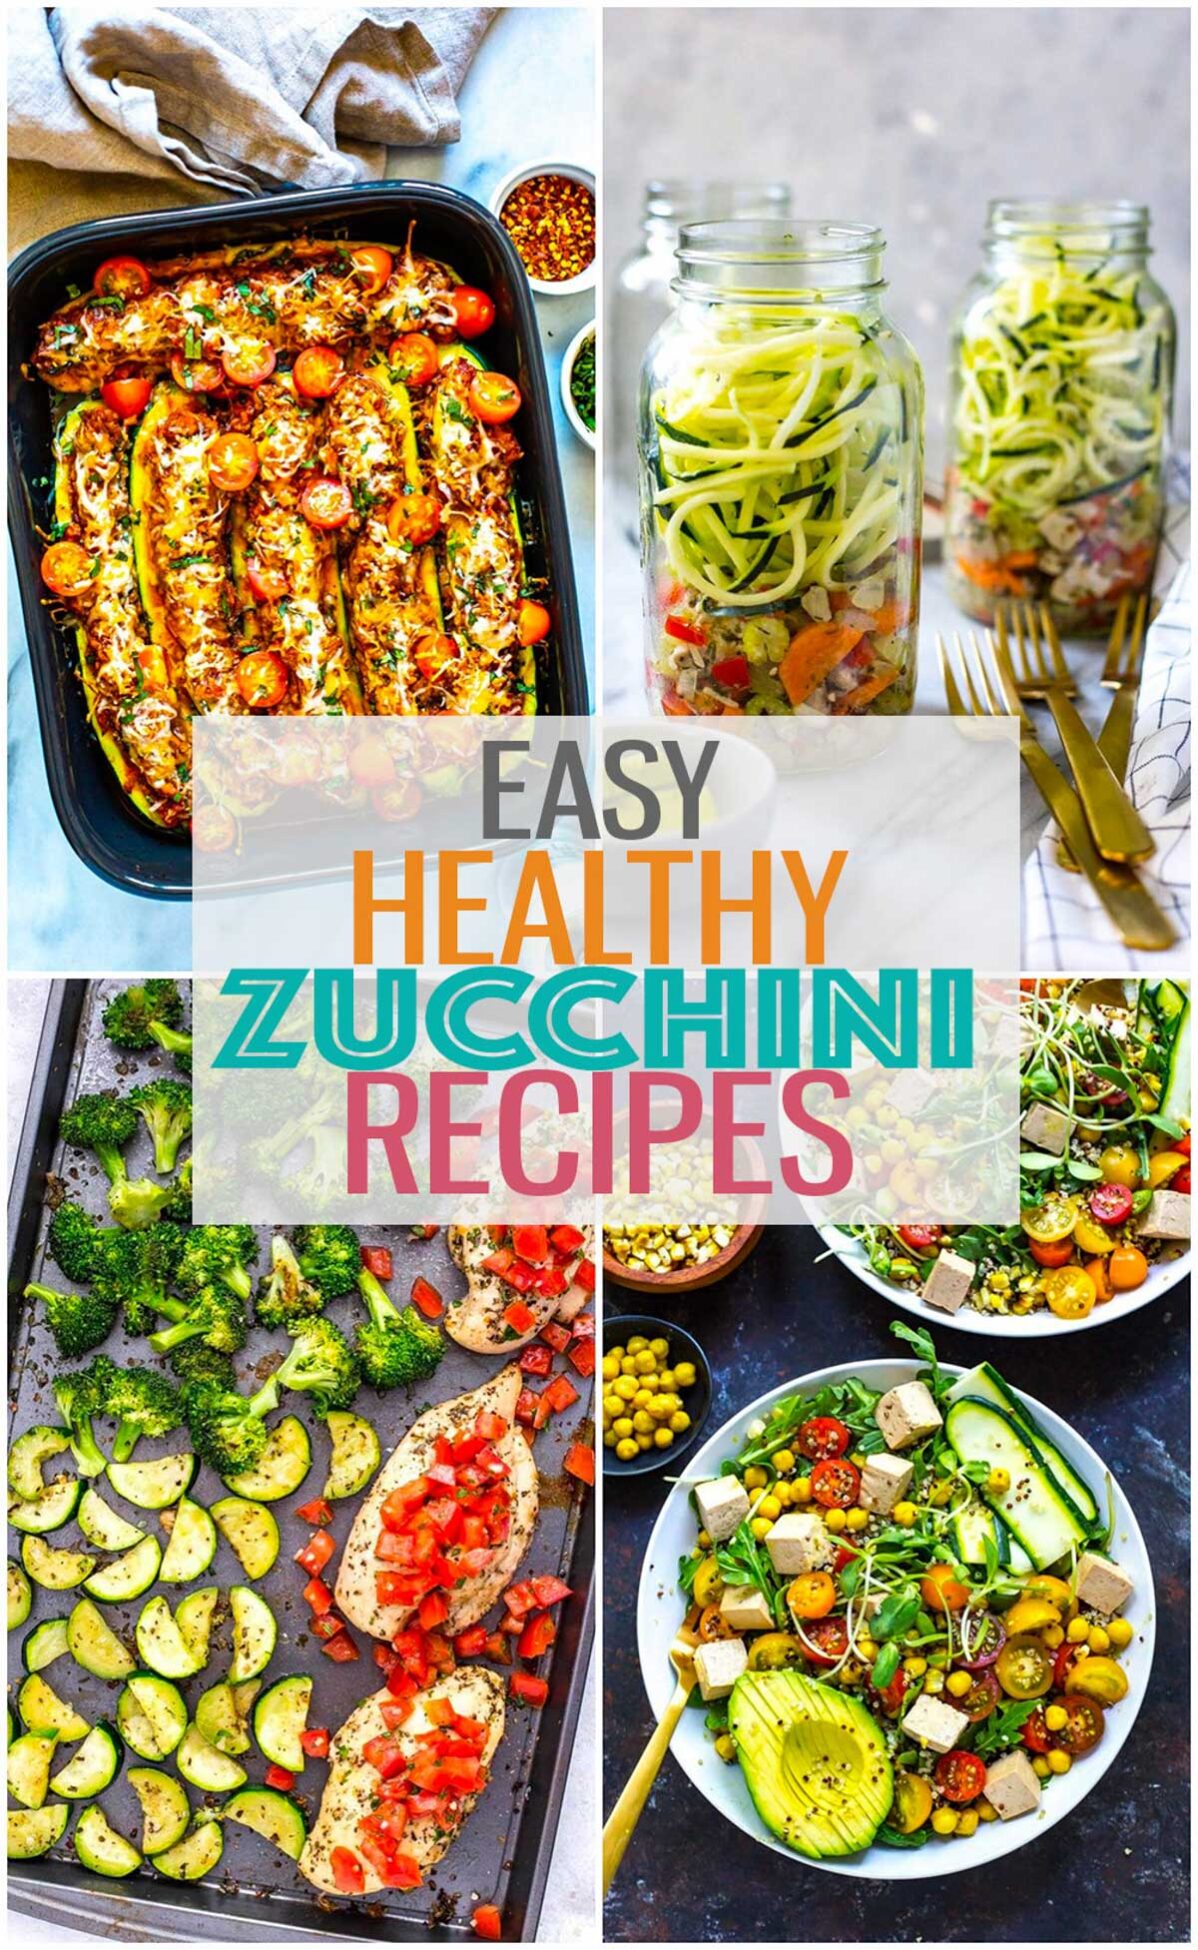 A collage of four different zucchini recipes with the text "Easy Healthy Zucchini Recipes" layered over top.